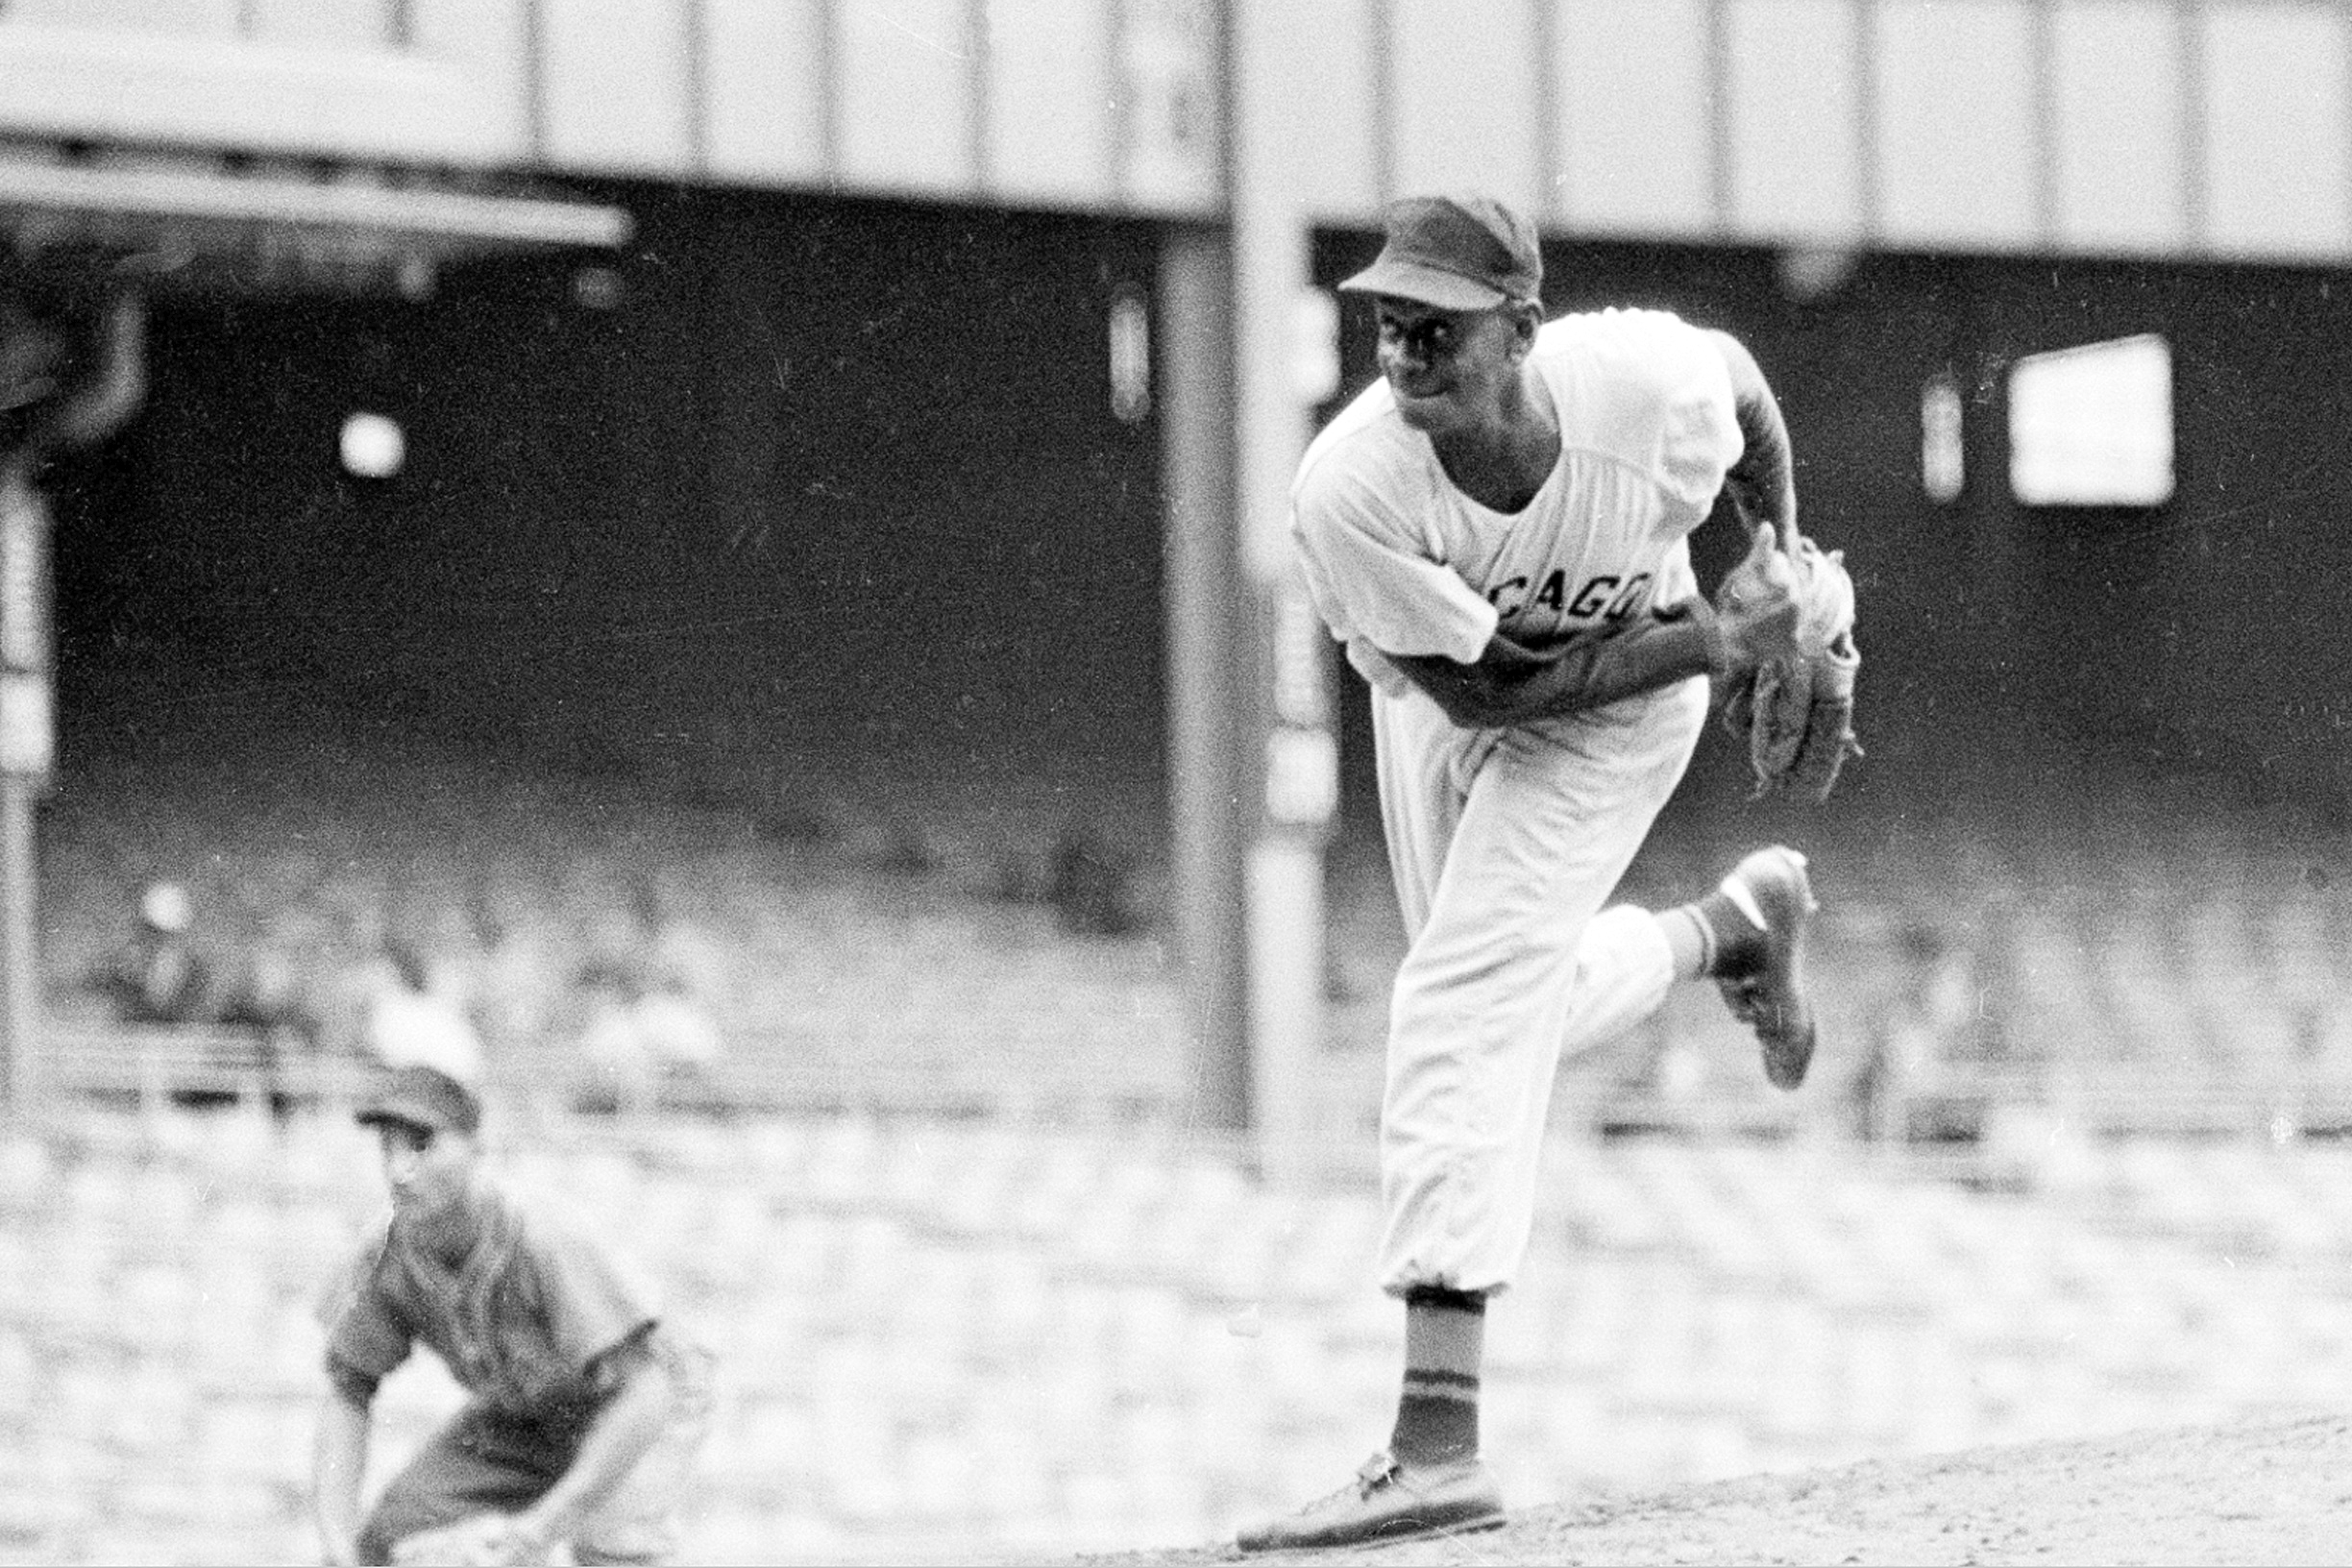 In this Aug. 17, 1961, file photo, pitcher Leroy "Satchel" Paige is shown in action during the Negro American League 29th East-West All Star game at New York's Yankee Stadium. Photo credit: Harry Harris, The Associated Press